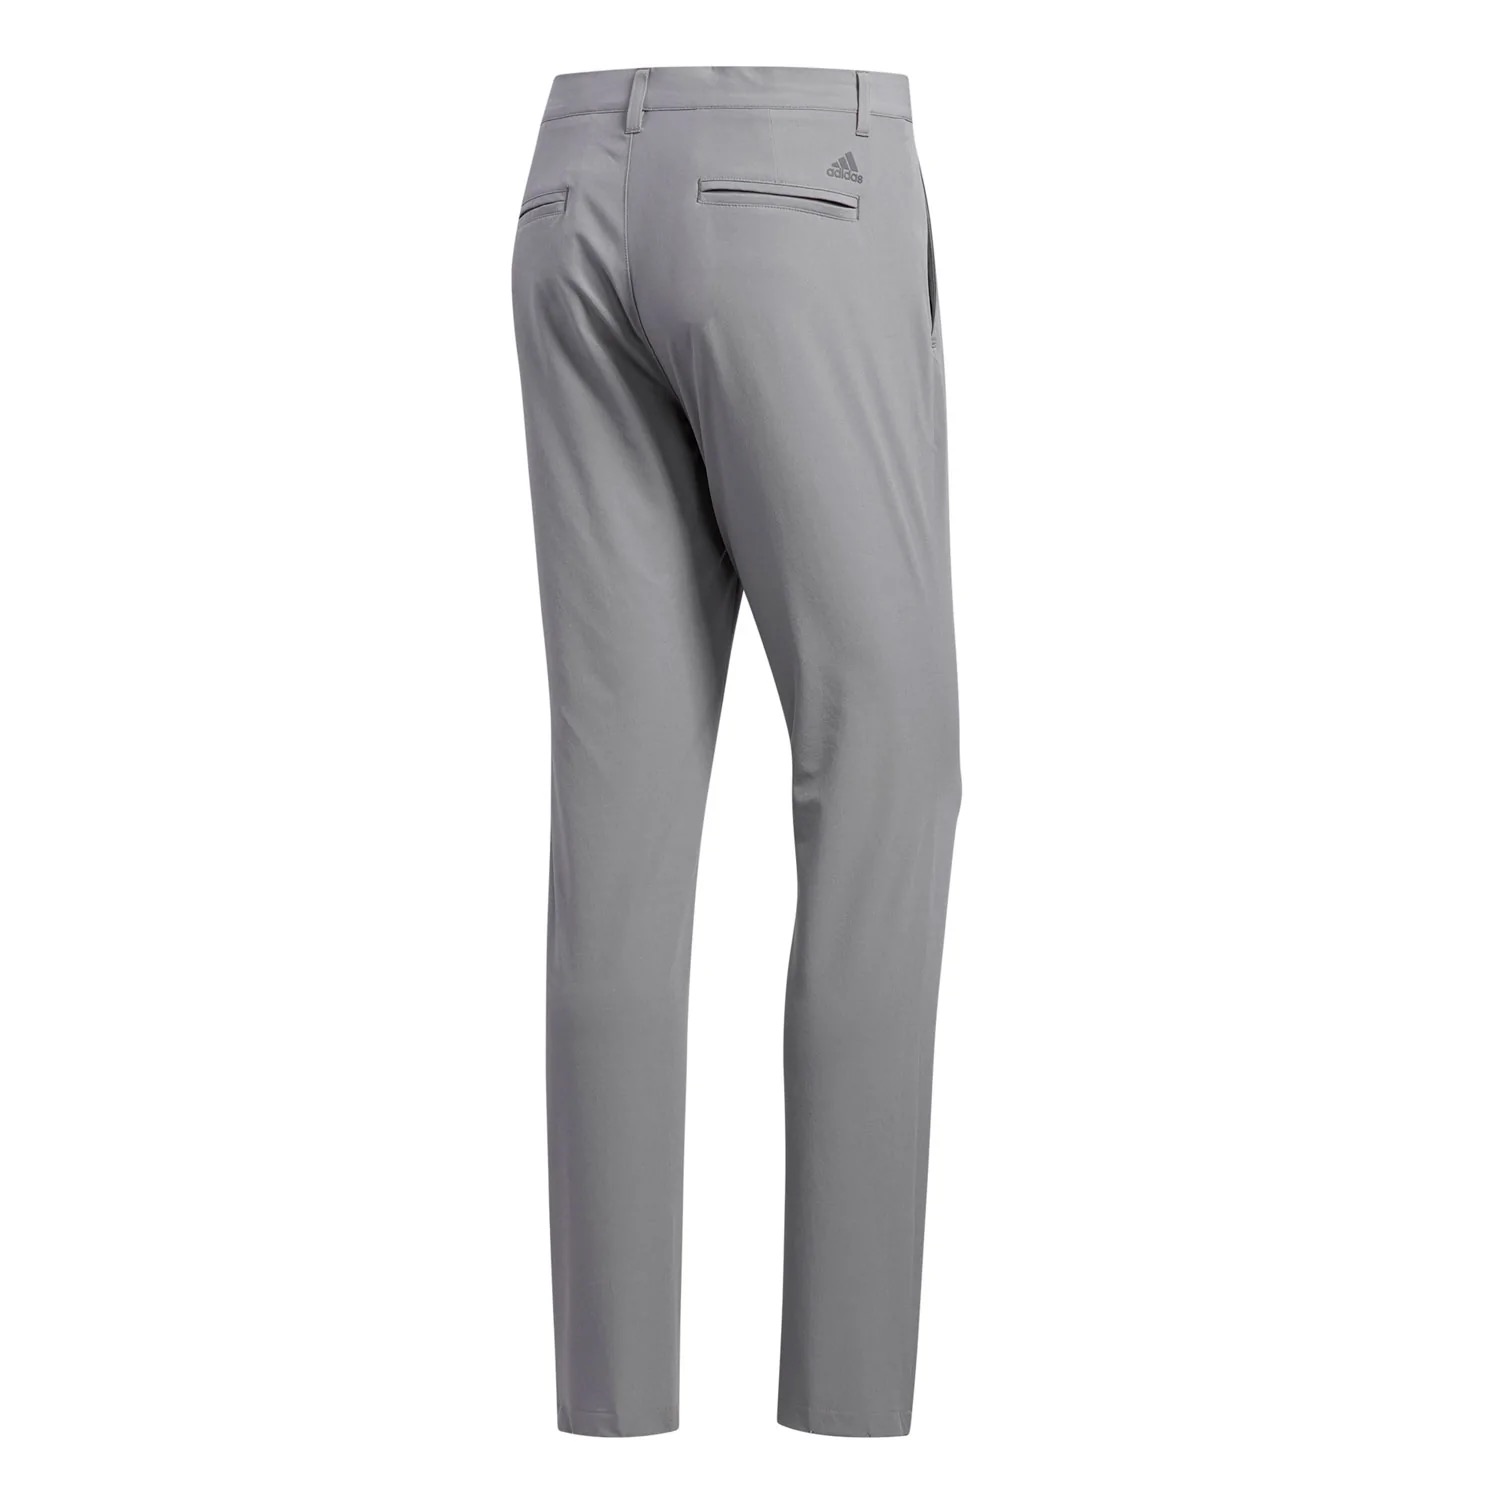 Adidas Ultimate Pant Tapered Grey